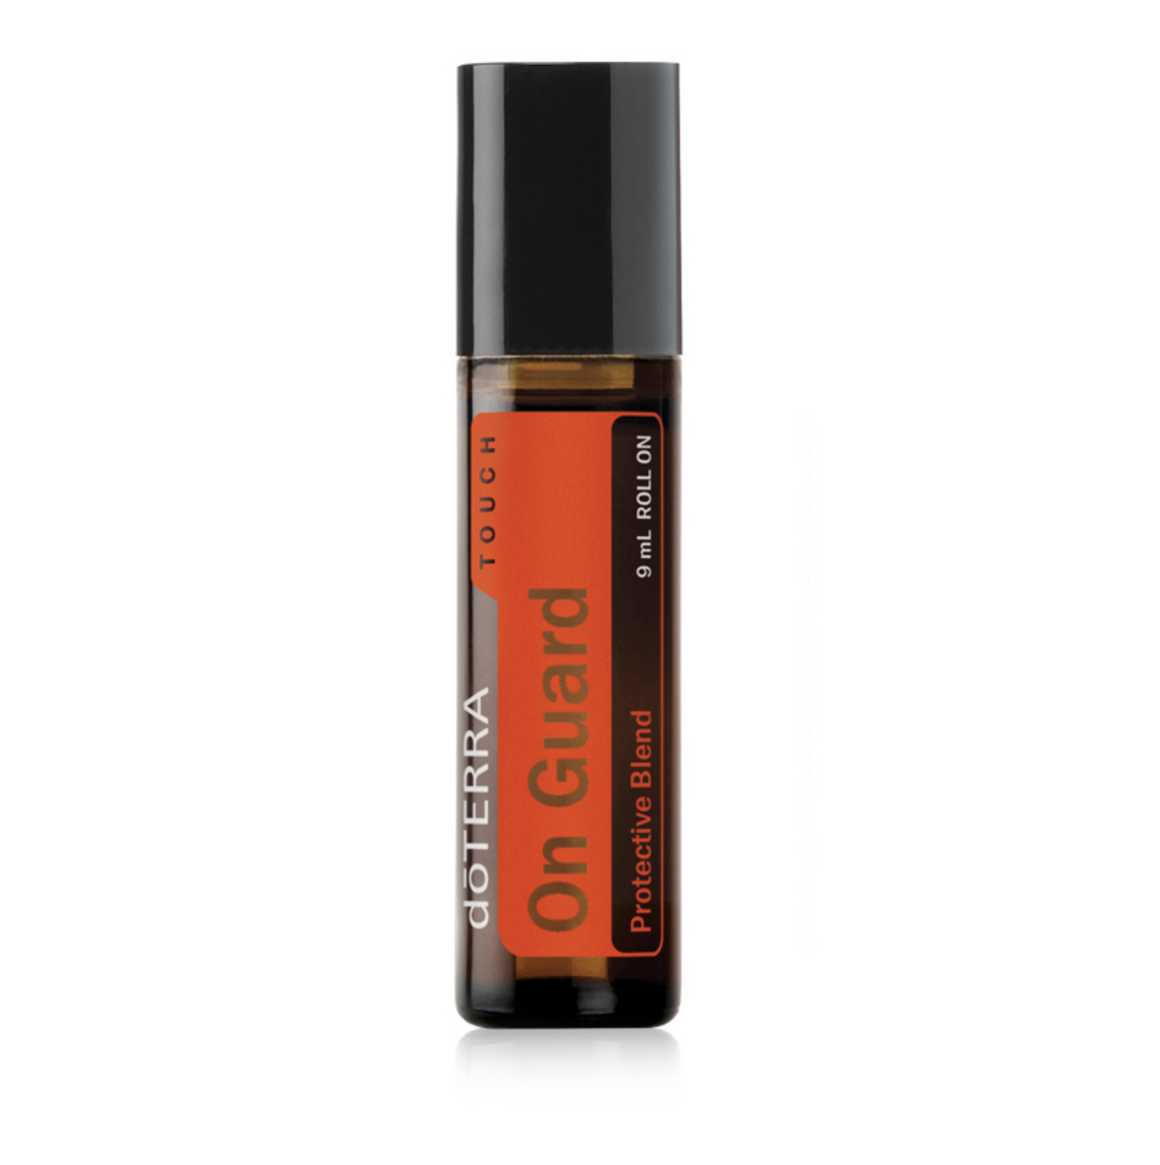 doTERRA On Guard protective blend 15ml